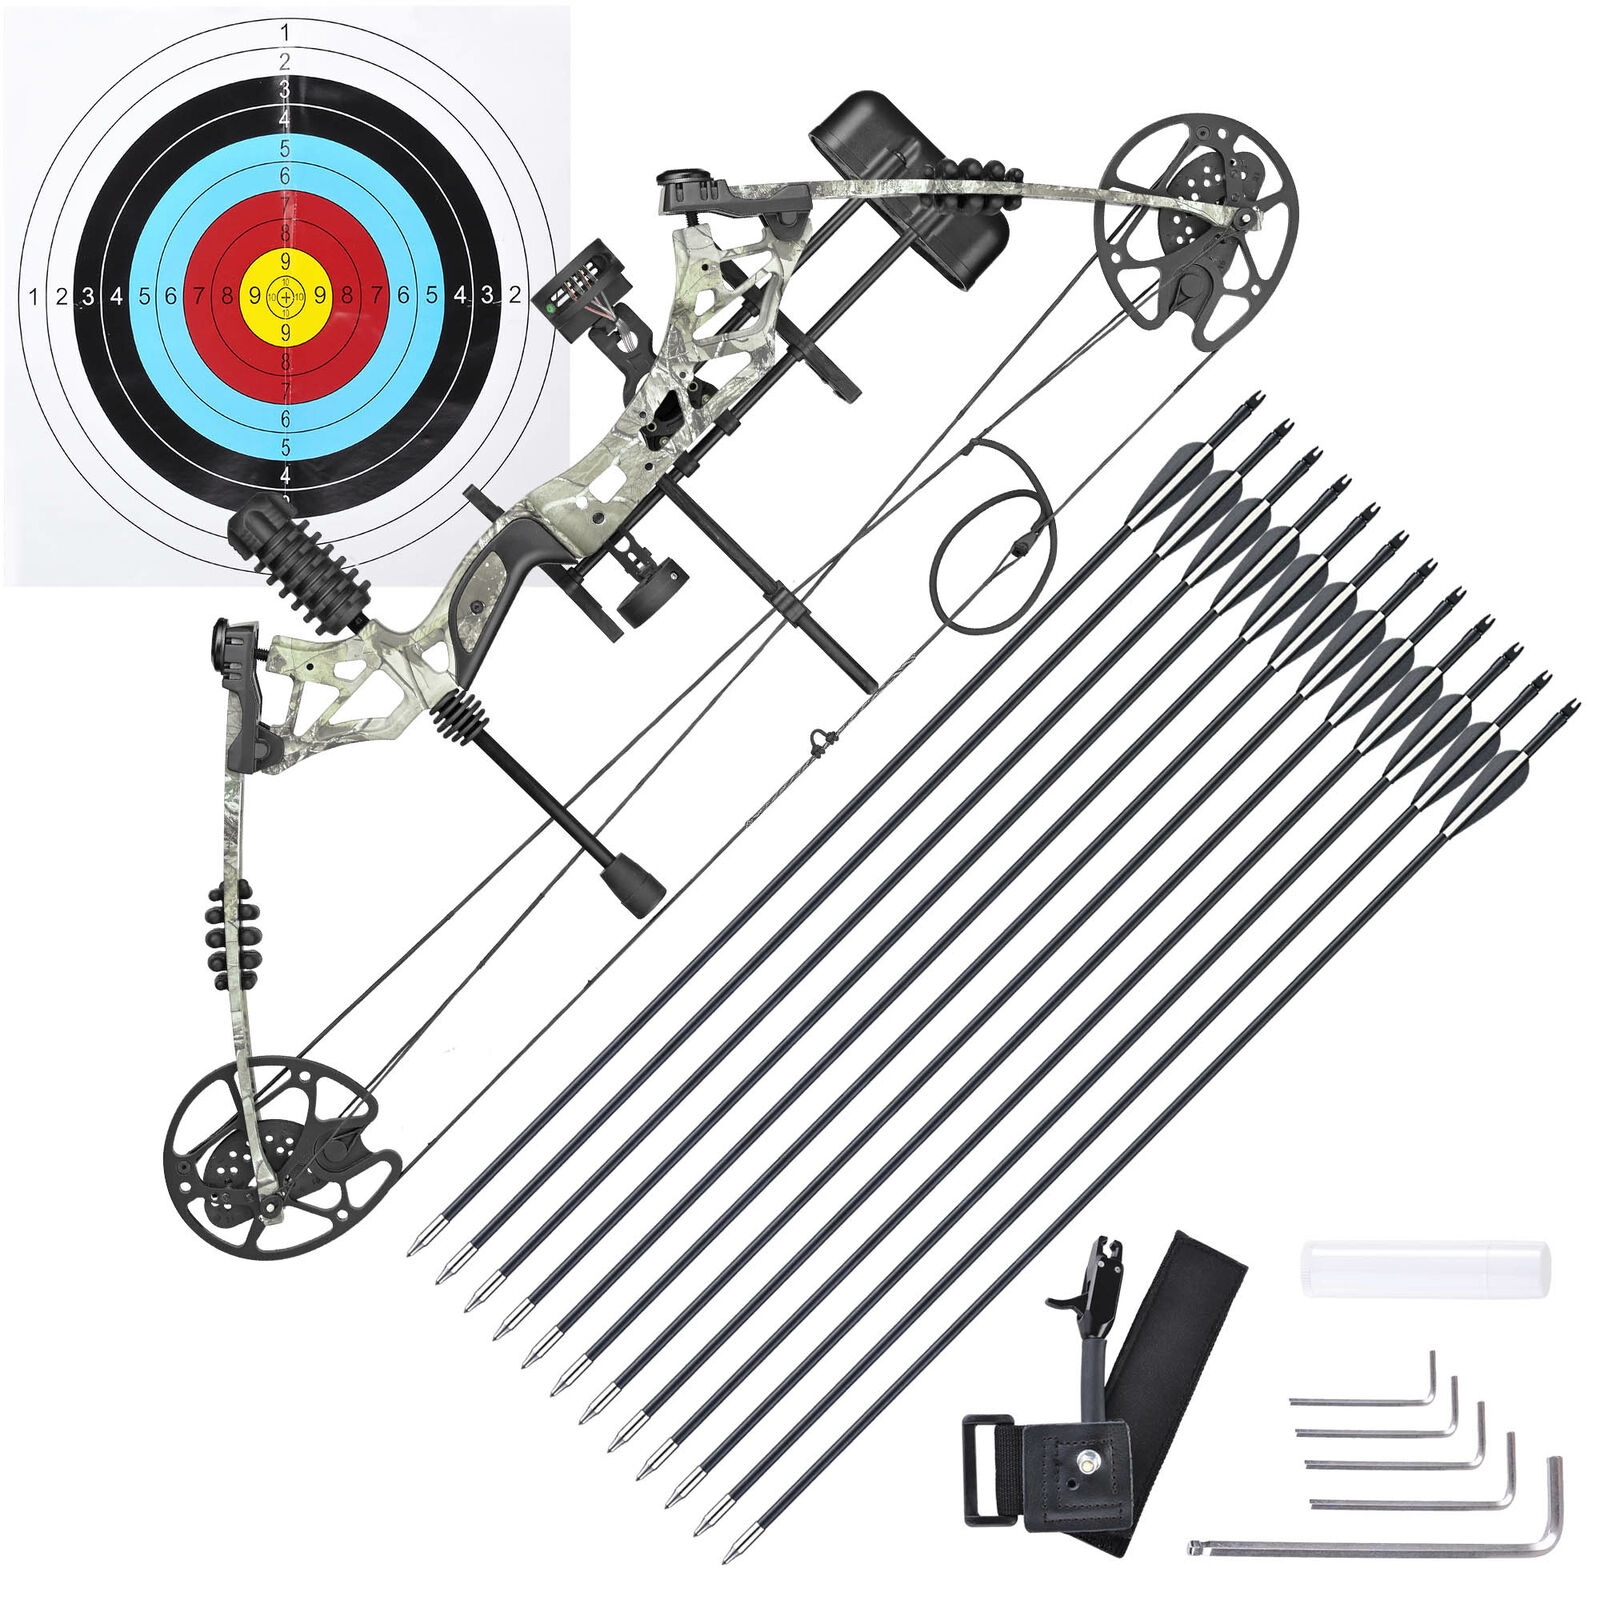 Image 3 - Pro Compound Right Hand Bow Kit w/ Arrow Adjustable 20 to 70lbs Archery Set Camo